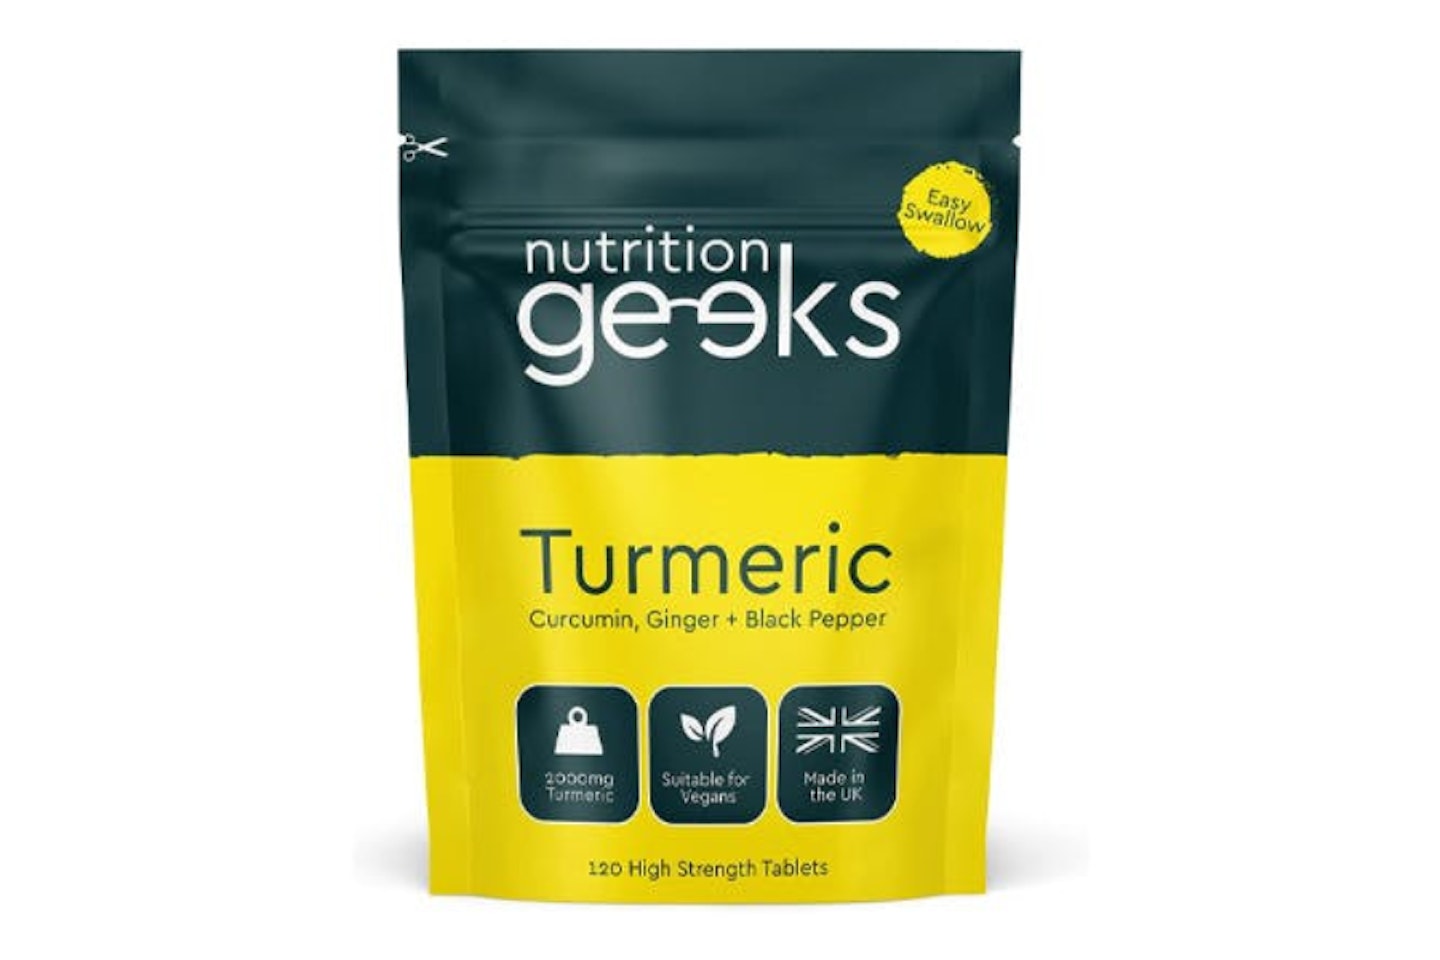 Nutrition Geeks Turmeric Tablets with Black Pepper and Ginger